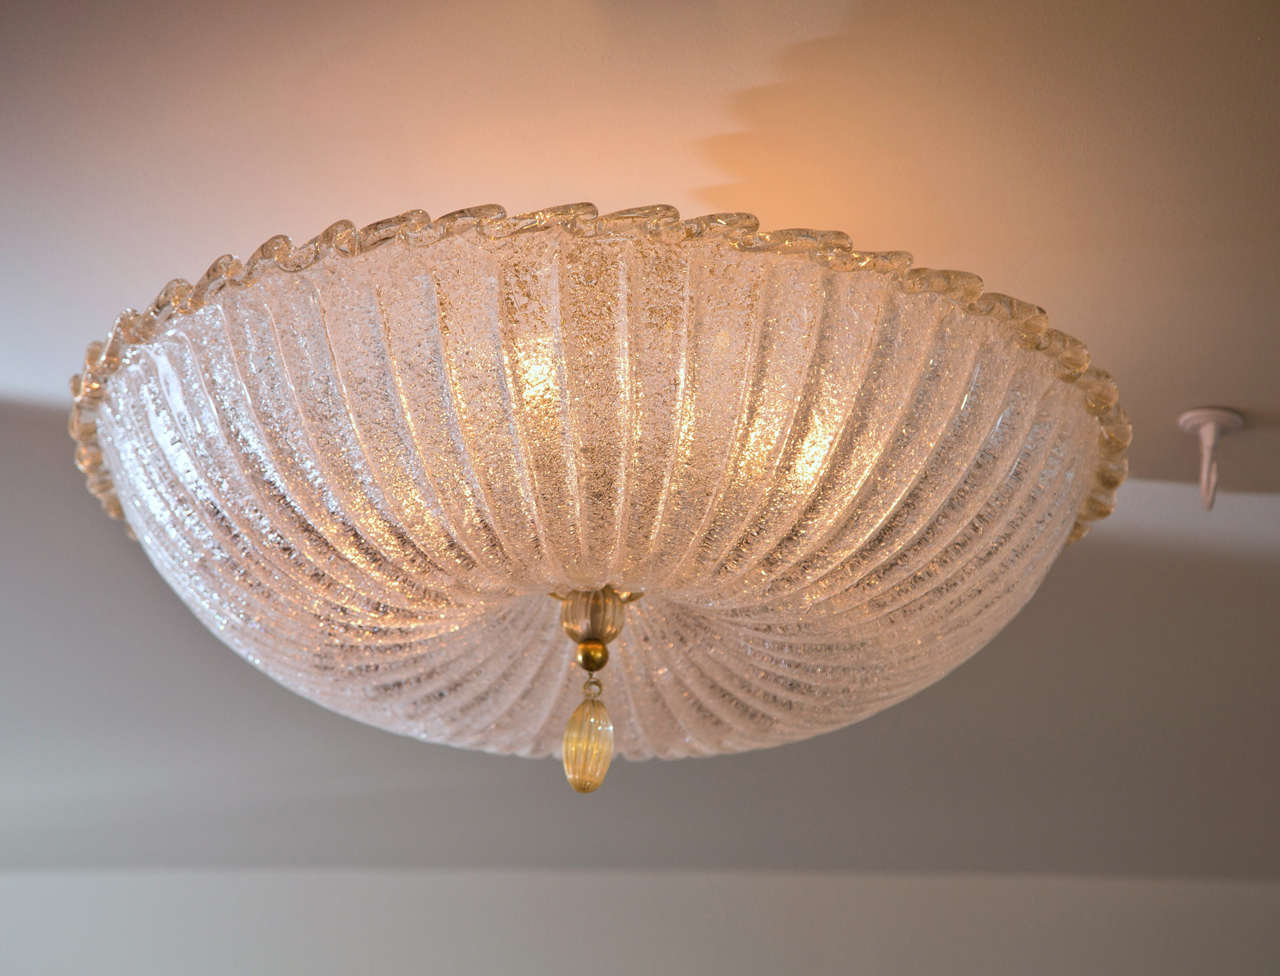 Large shimmery pin cushion shaped ceiling fixture with a lightly gold blown rim, disk and tassel. When illuminated it takes on a beautiful icy effect.
This fixture will be made install ready with unlacquered brass hardware to match the brass detail